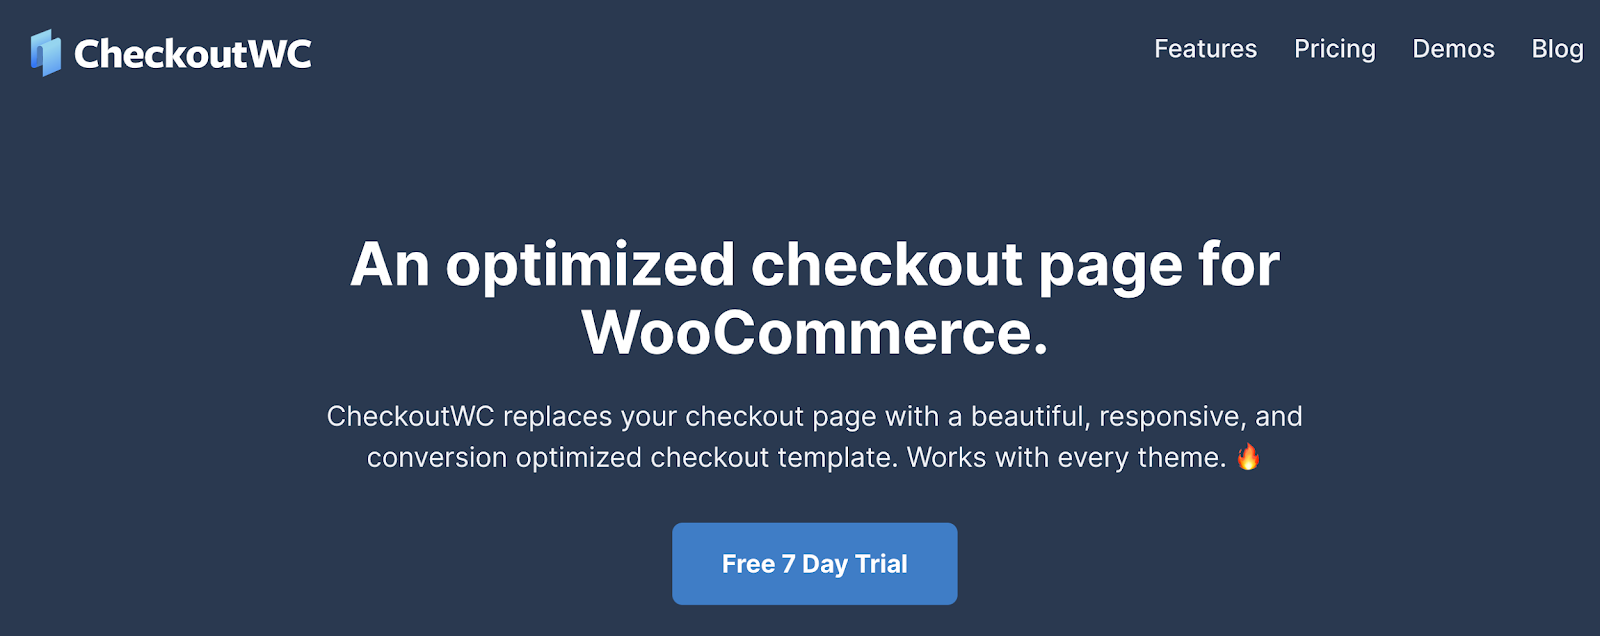 checkoutwc woocommerce checkout page